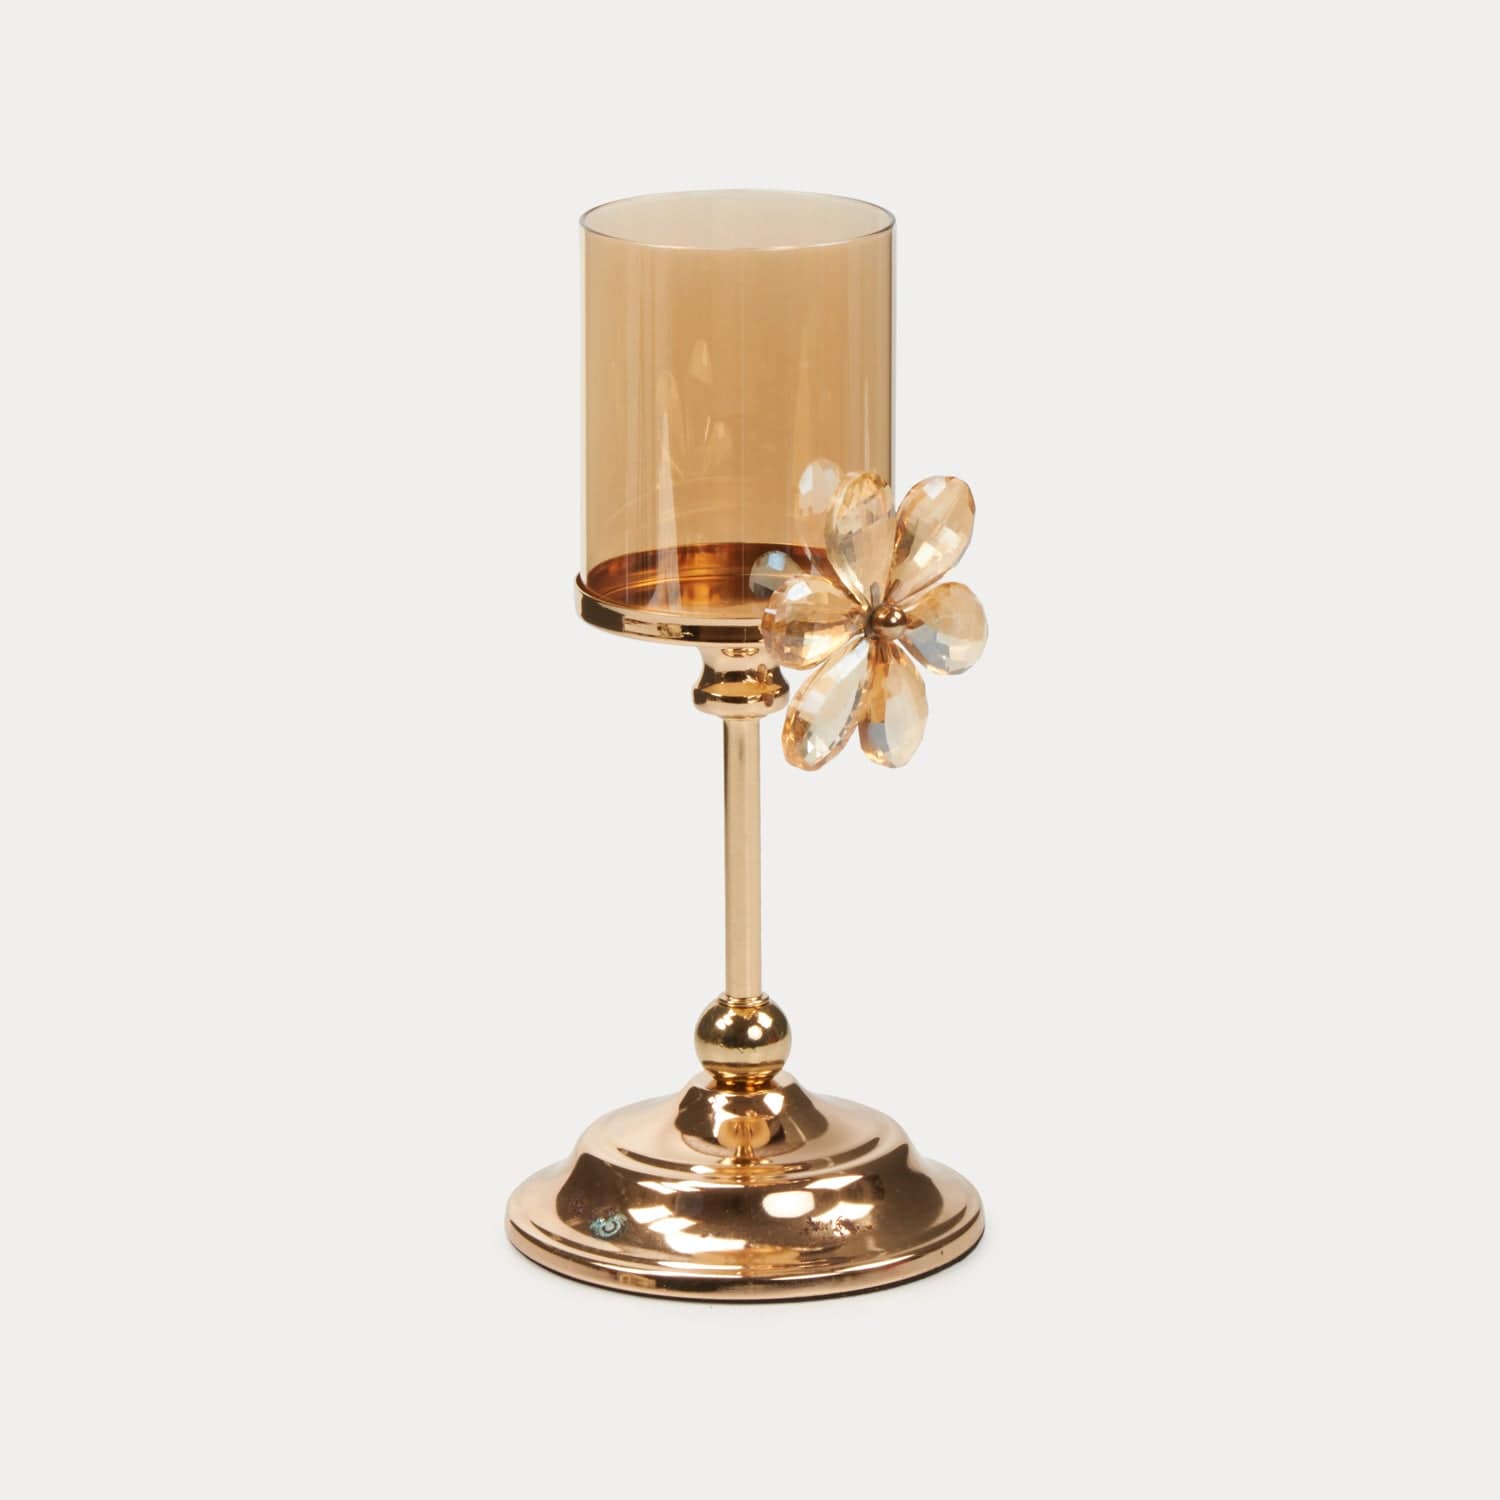 Red Butler Candle Stand Crystal Candle Stand ACCC00C11Y18A1 CCC11A1 Golden Brass Candle Stand with Glass Votive Holders for Festive Decor Redbutler